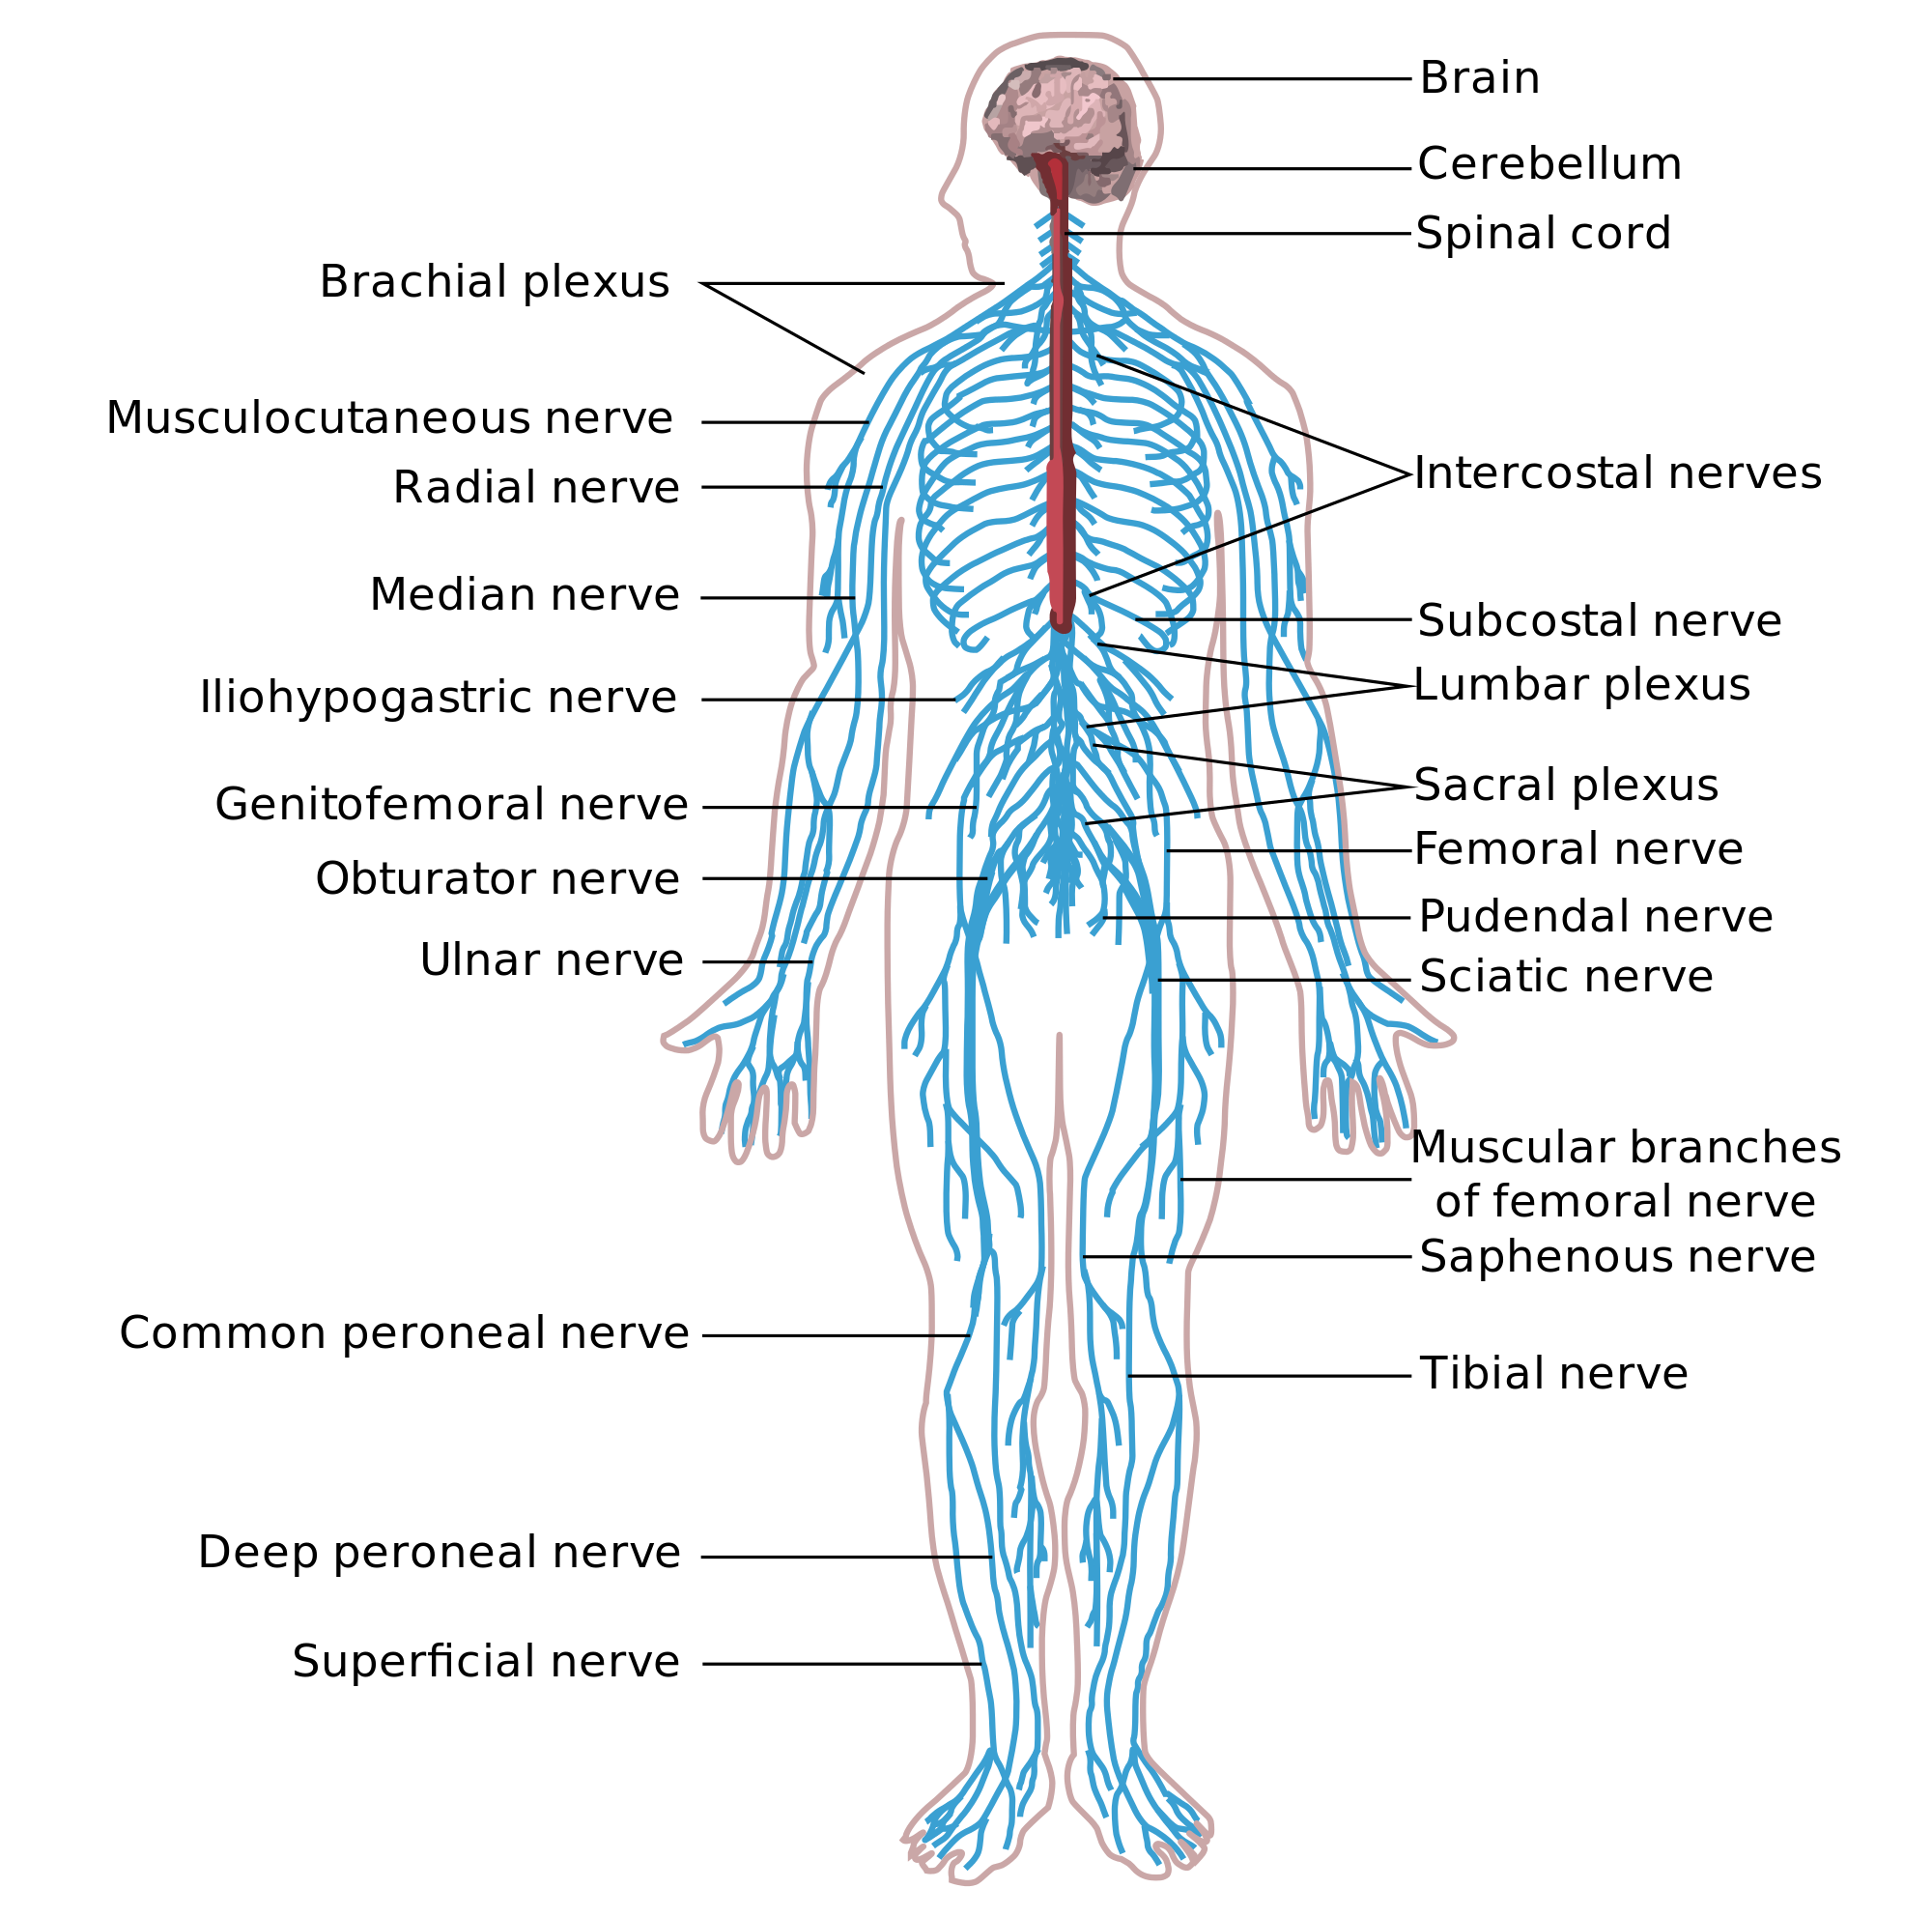 Blank Nervous System Diagram - Divisions of the Autonomic Nervous System | Anatomy and ... / They receive data and feedback from the sensory organs and from.